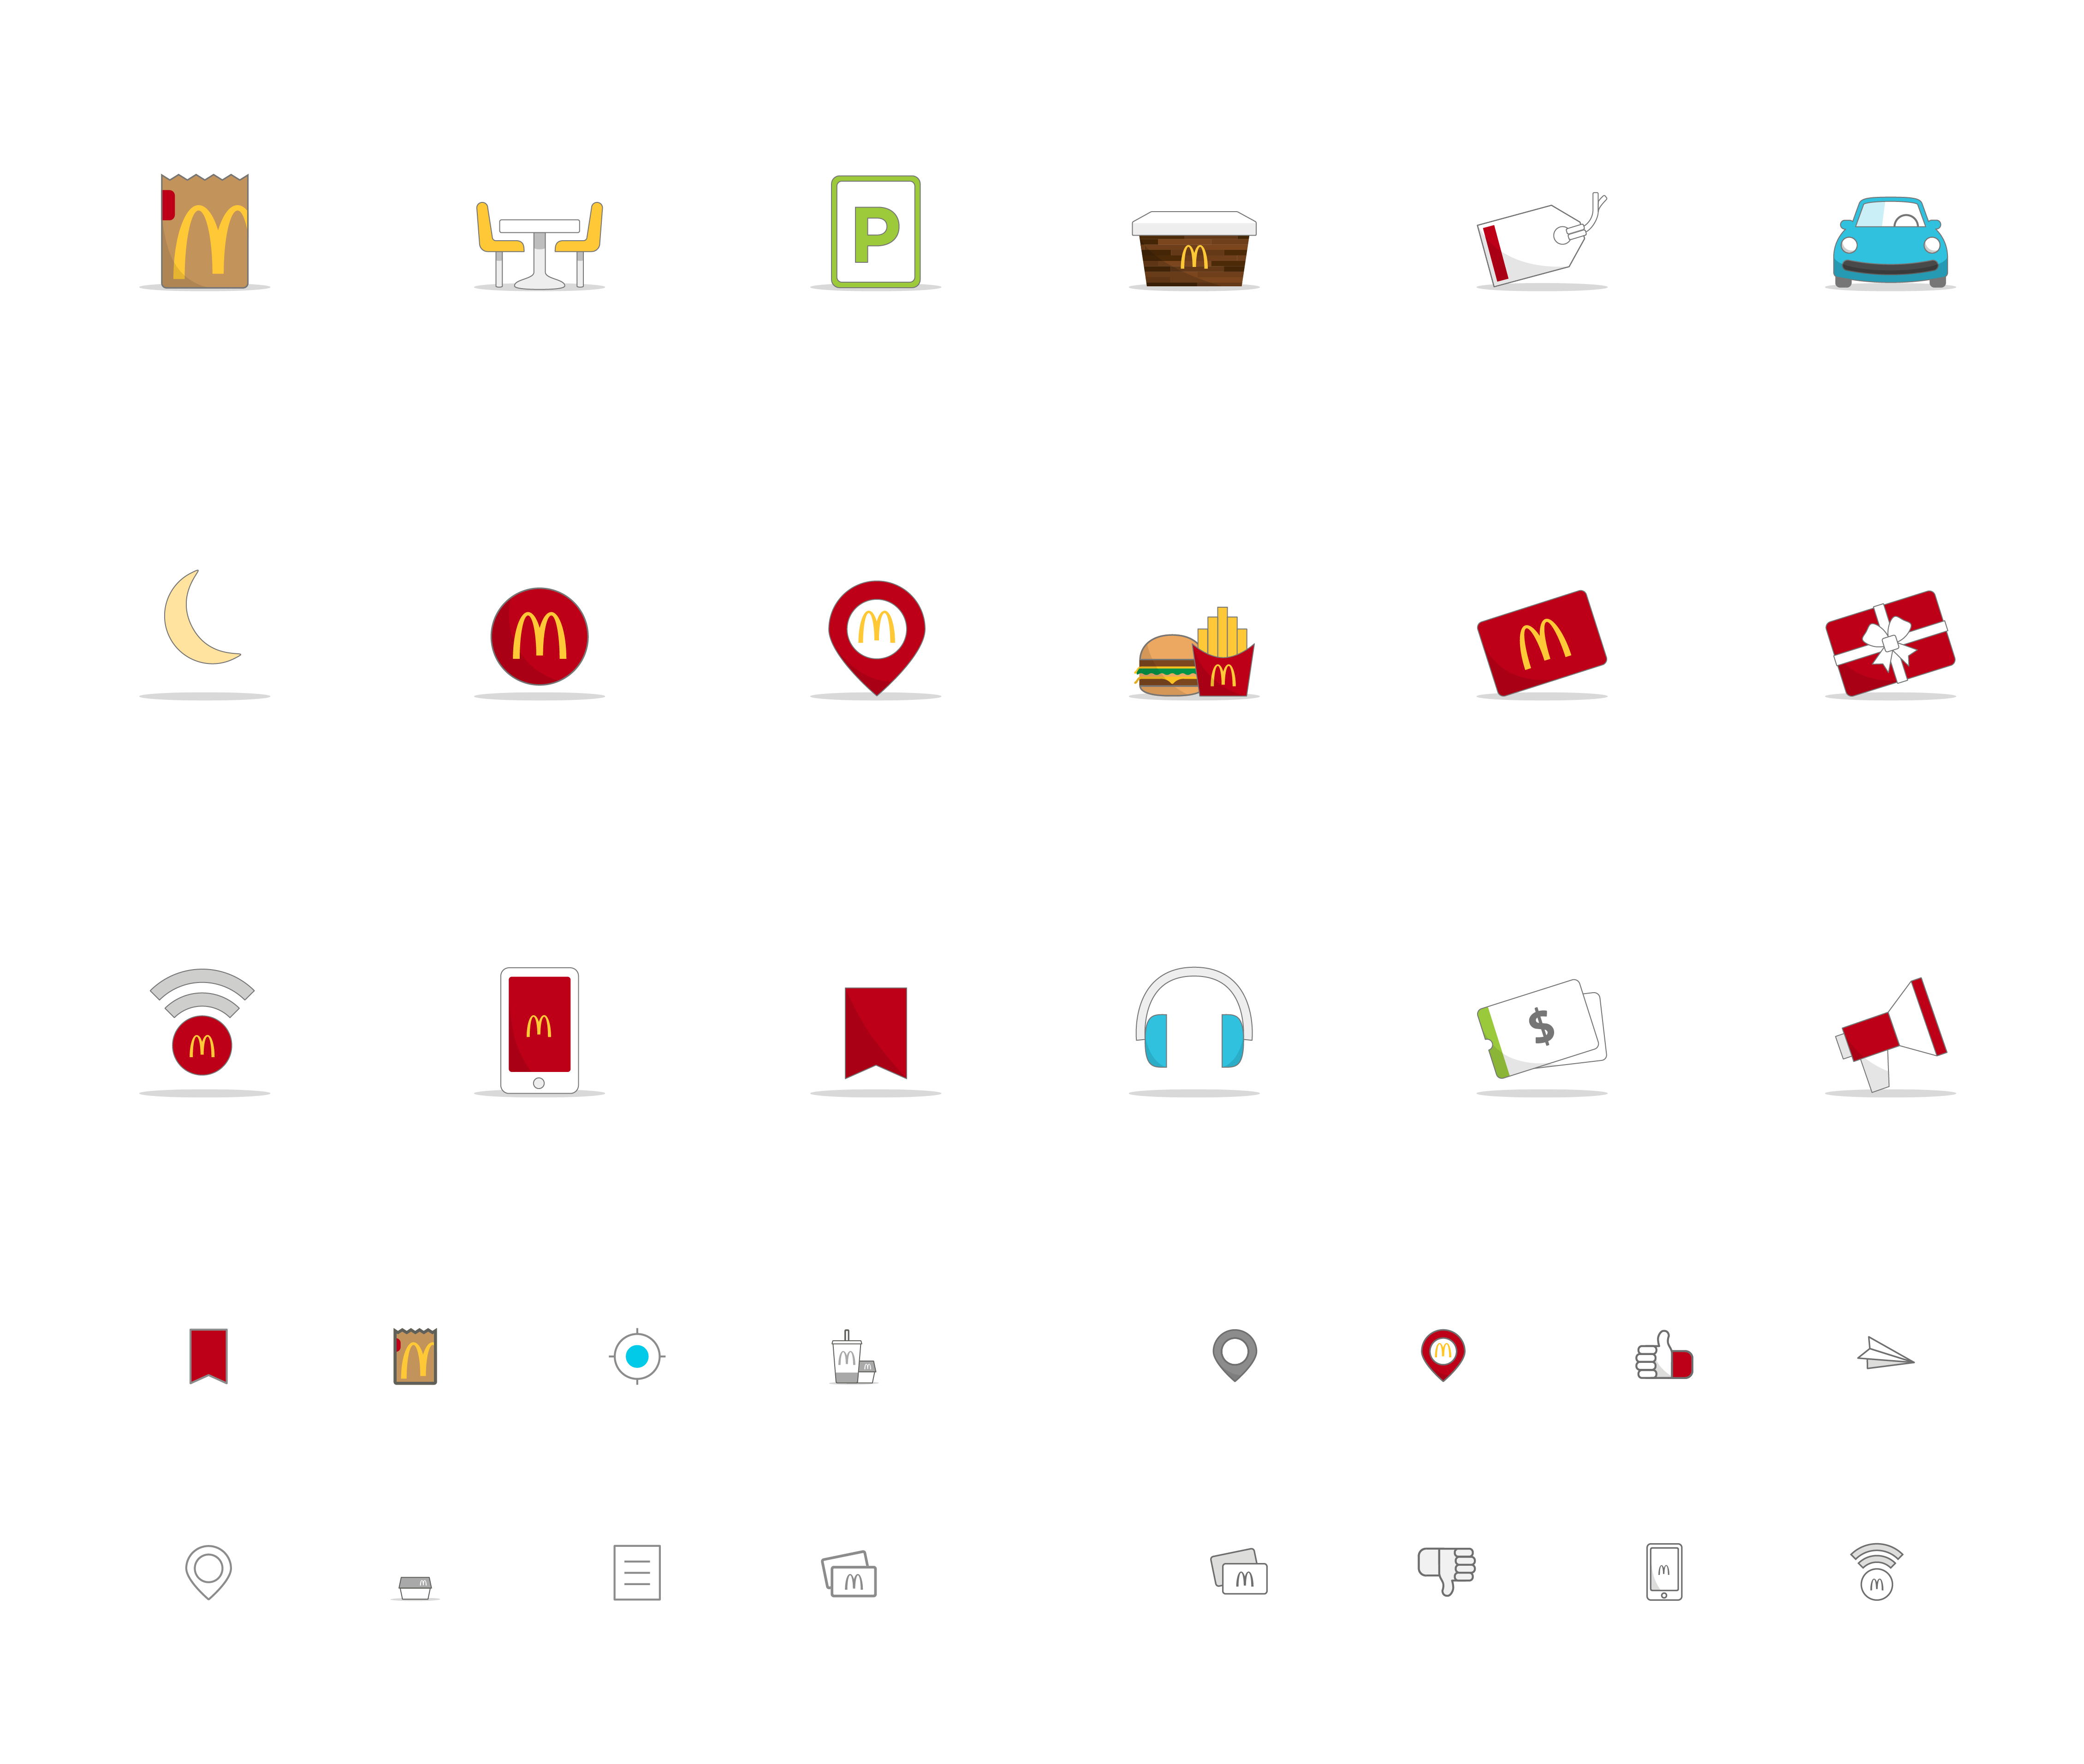 McD_System_IconSets-1